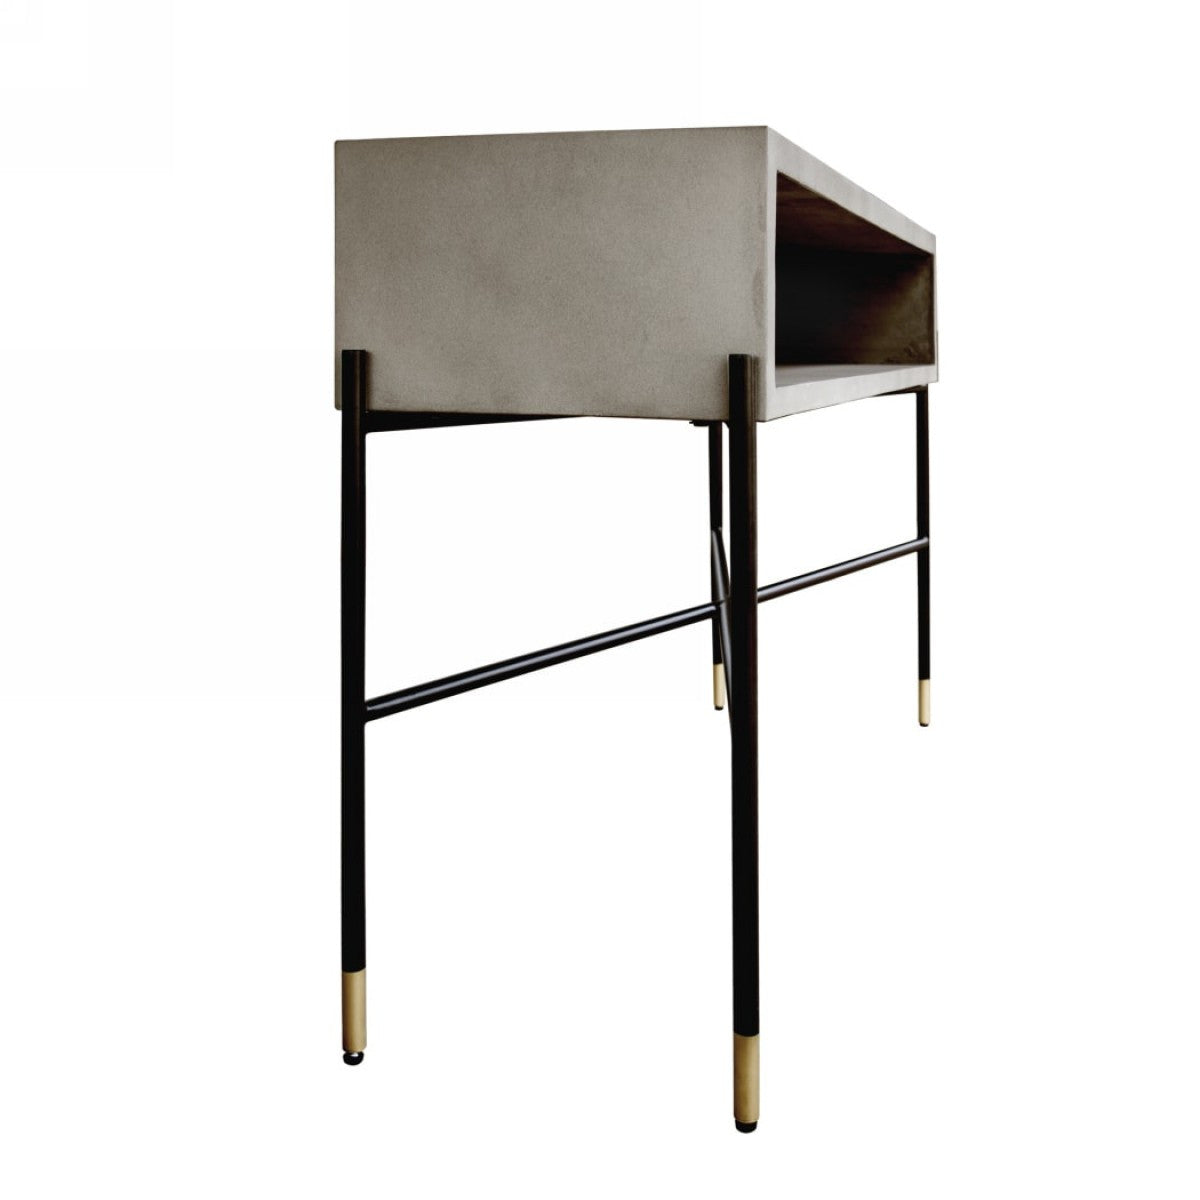 Industrial 45’ Concrete And Metal Console Console Table - Console Tables